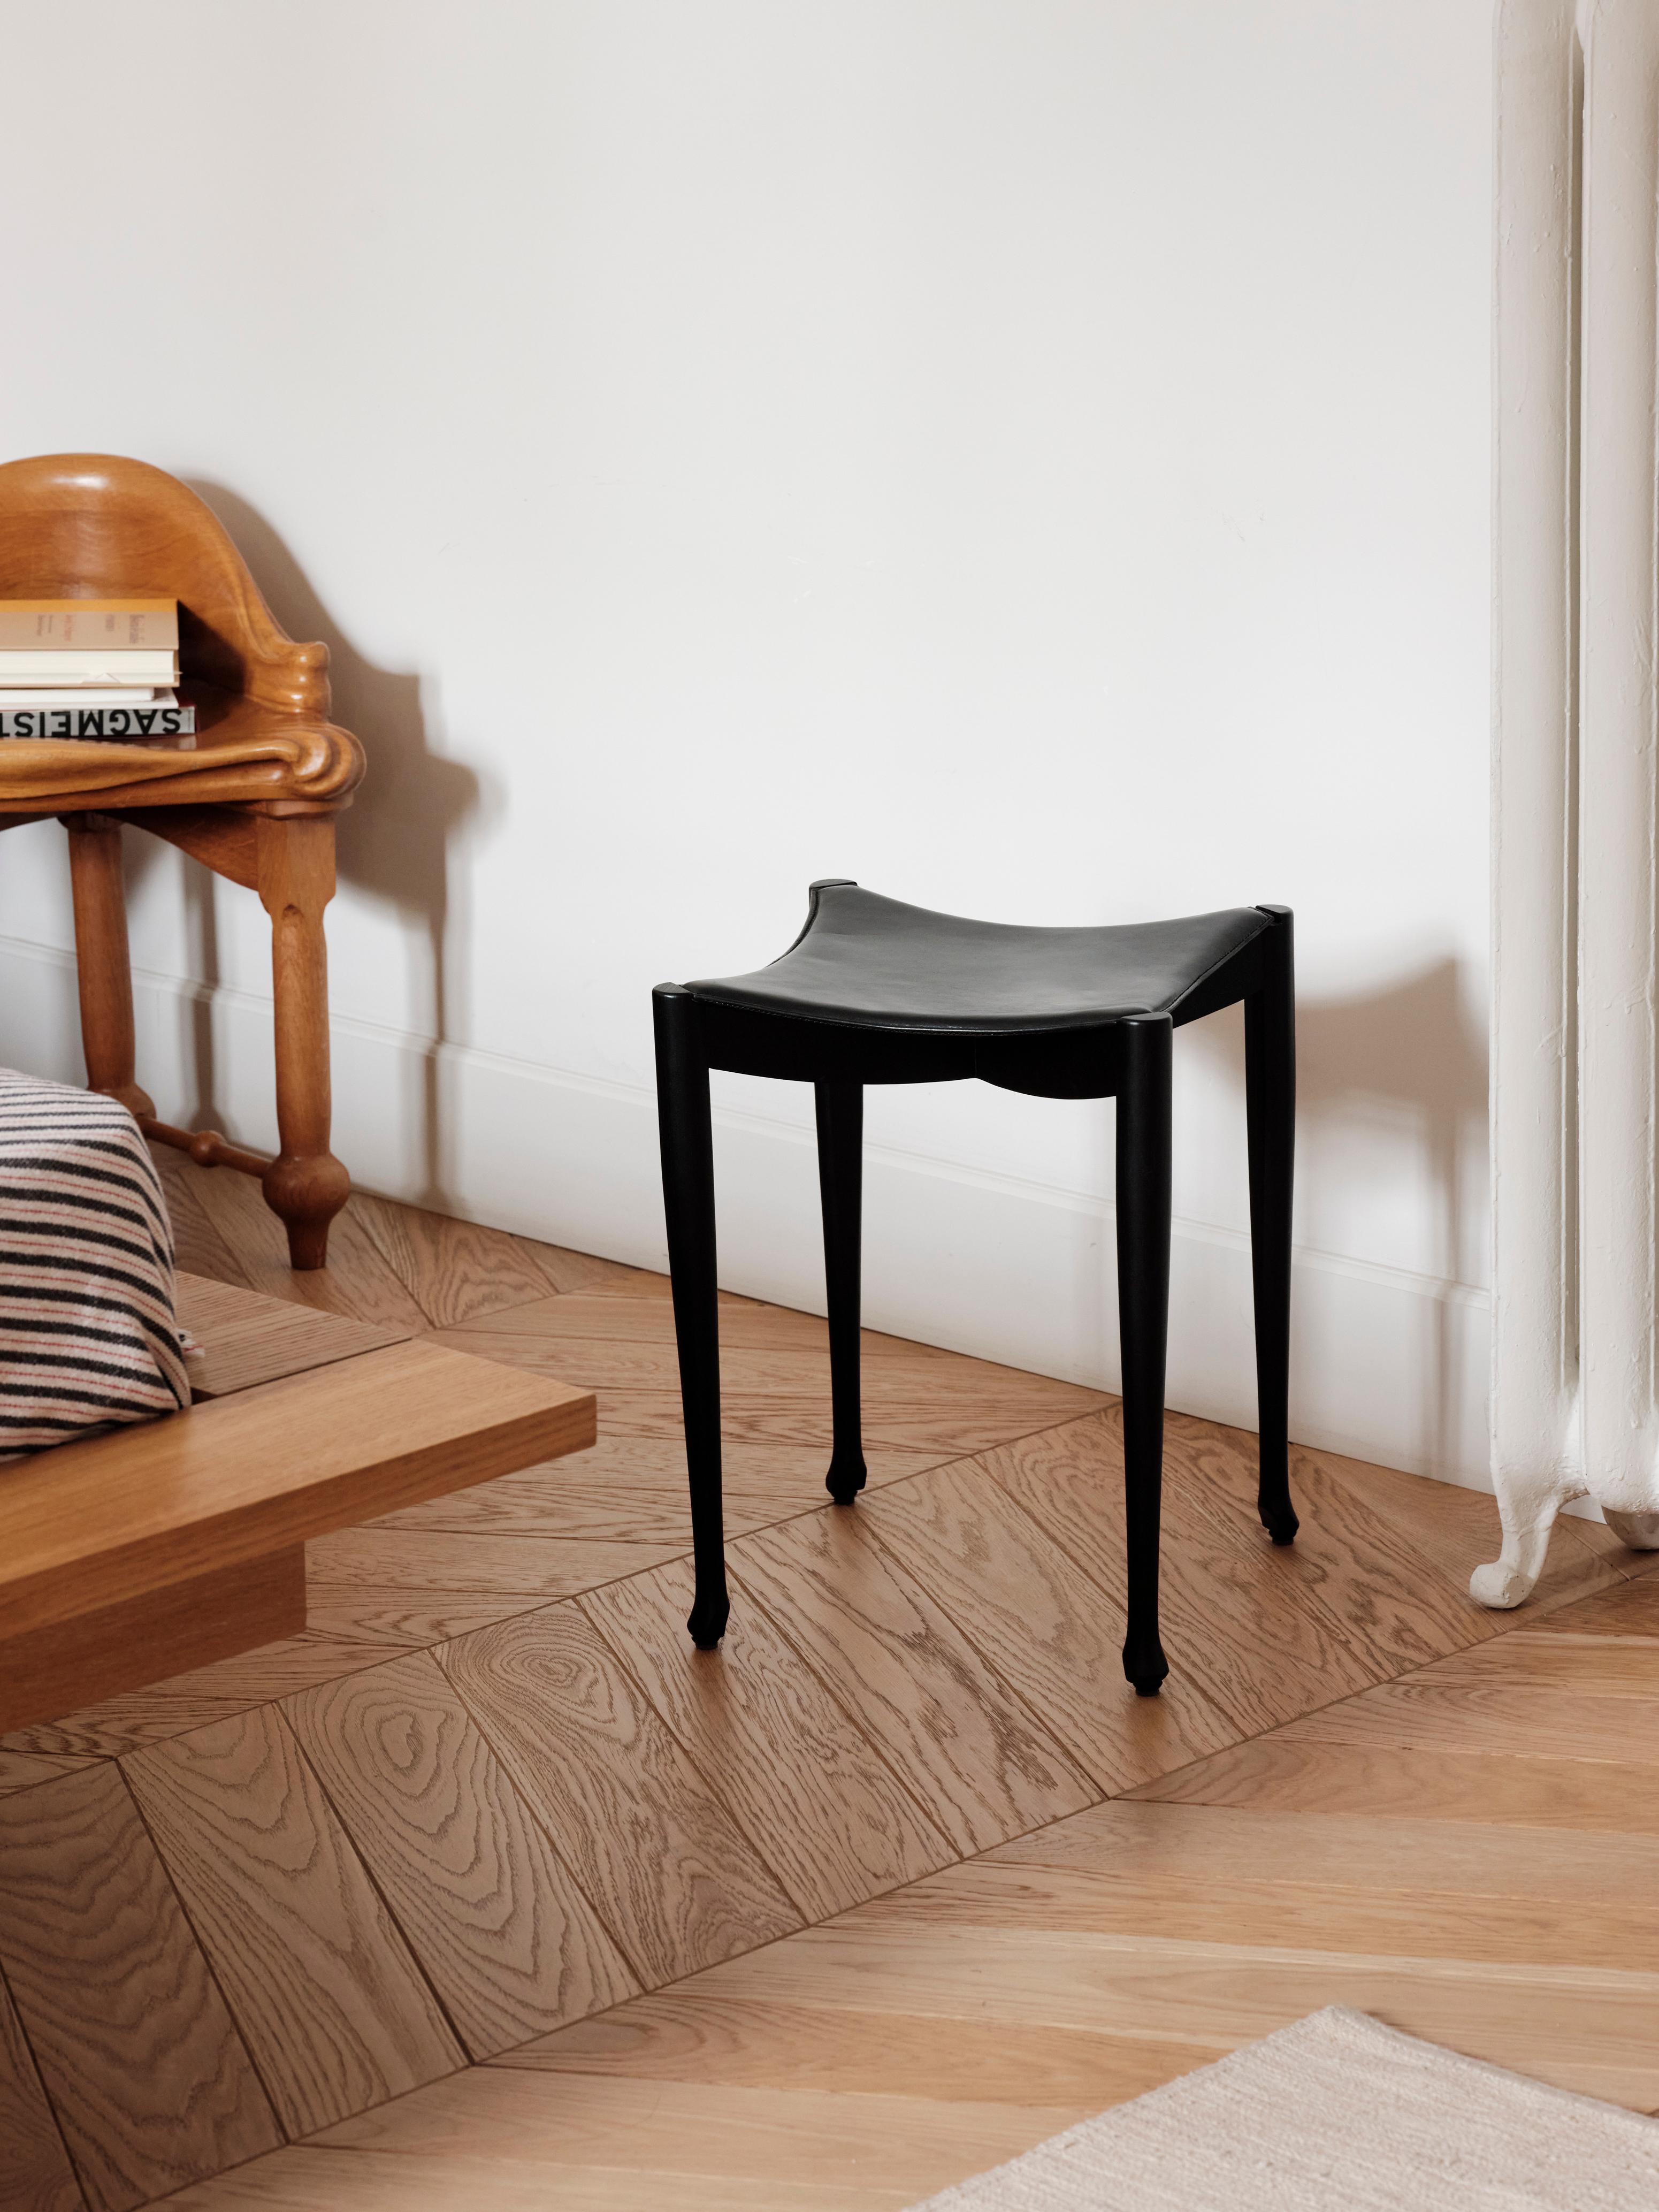 Gaulino stool by Oscar Tusquets, stained black ash wood, contemporary design For Sale 1